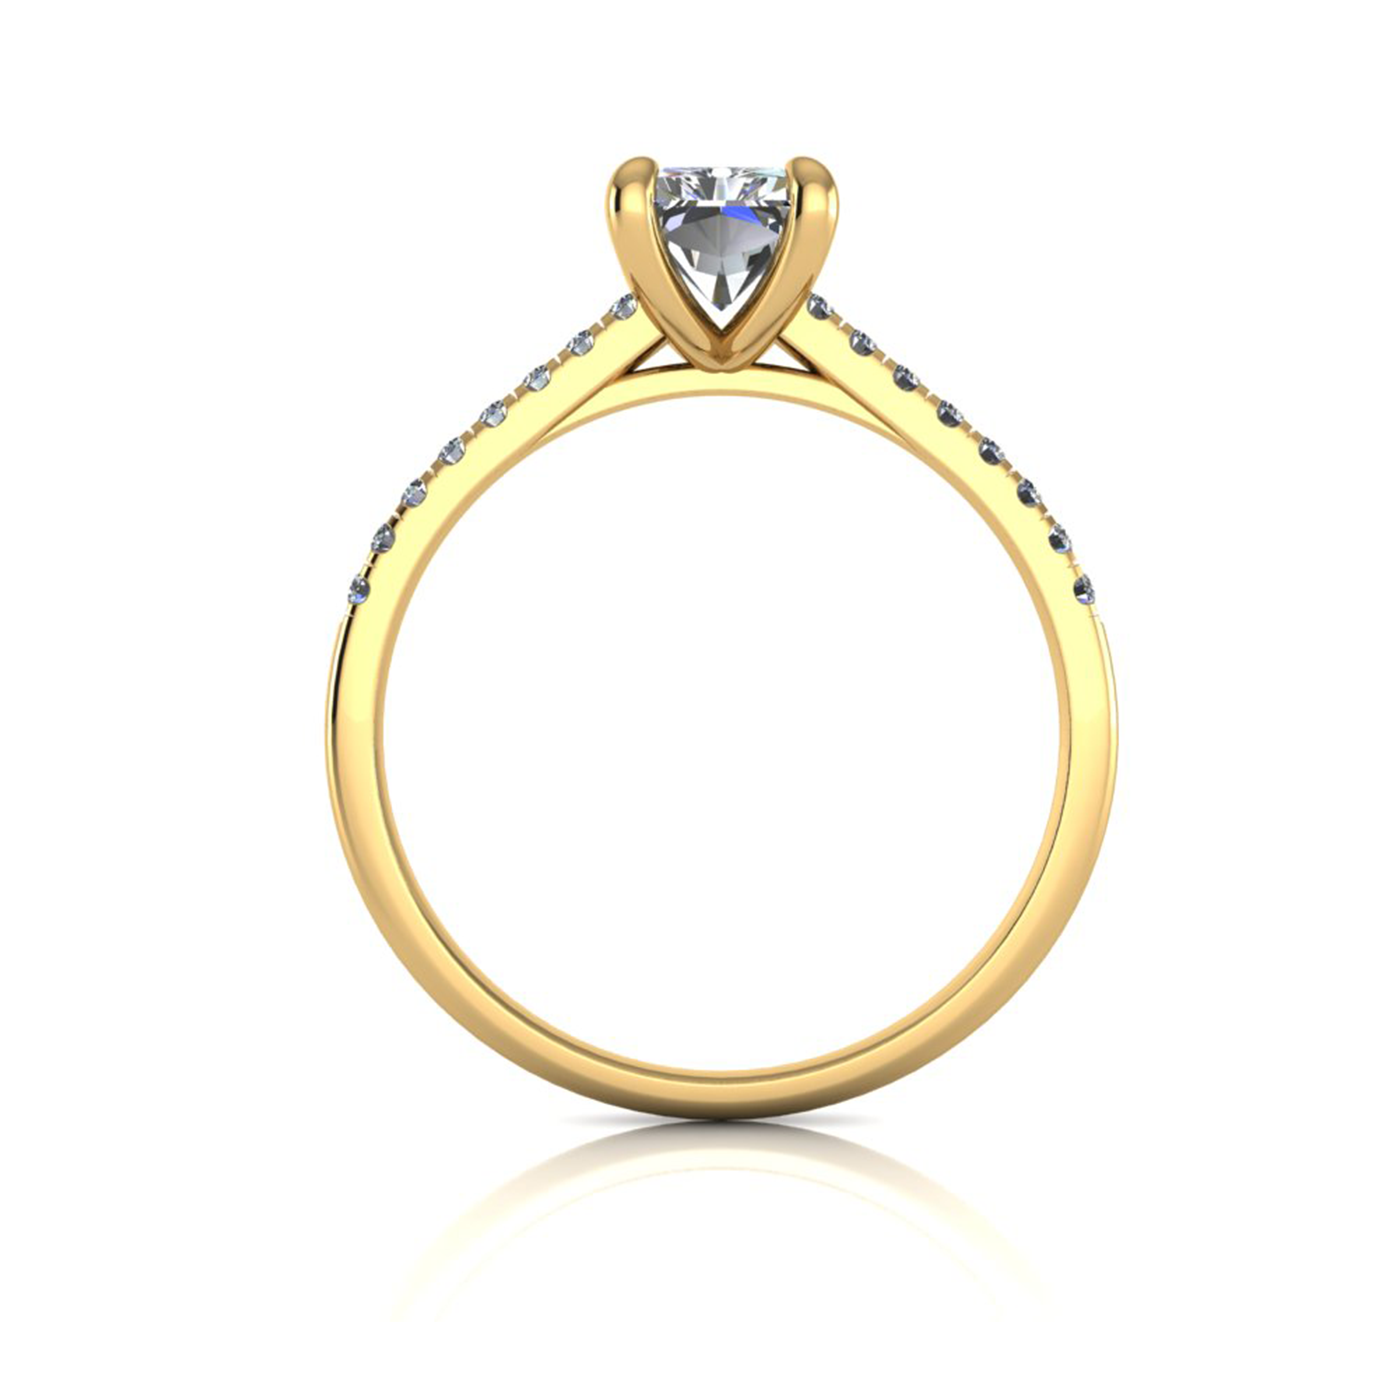 18k yellow gold  1,20 ct 4 prongs radiant cut diamond engagement ring with whisper thin pavÉ set band